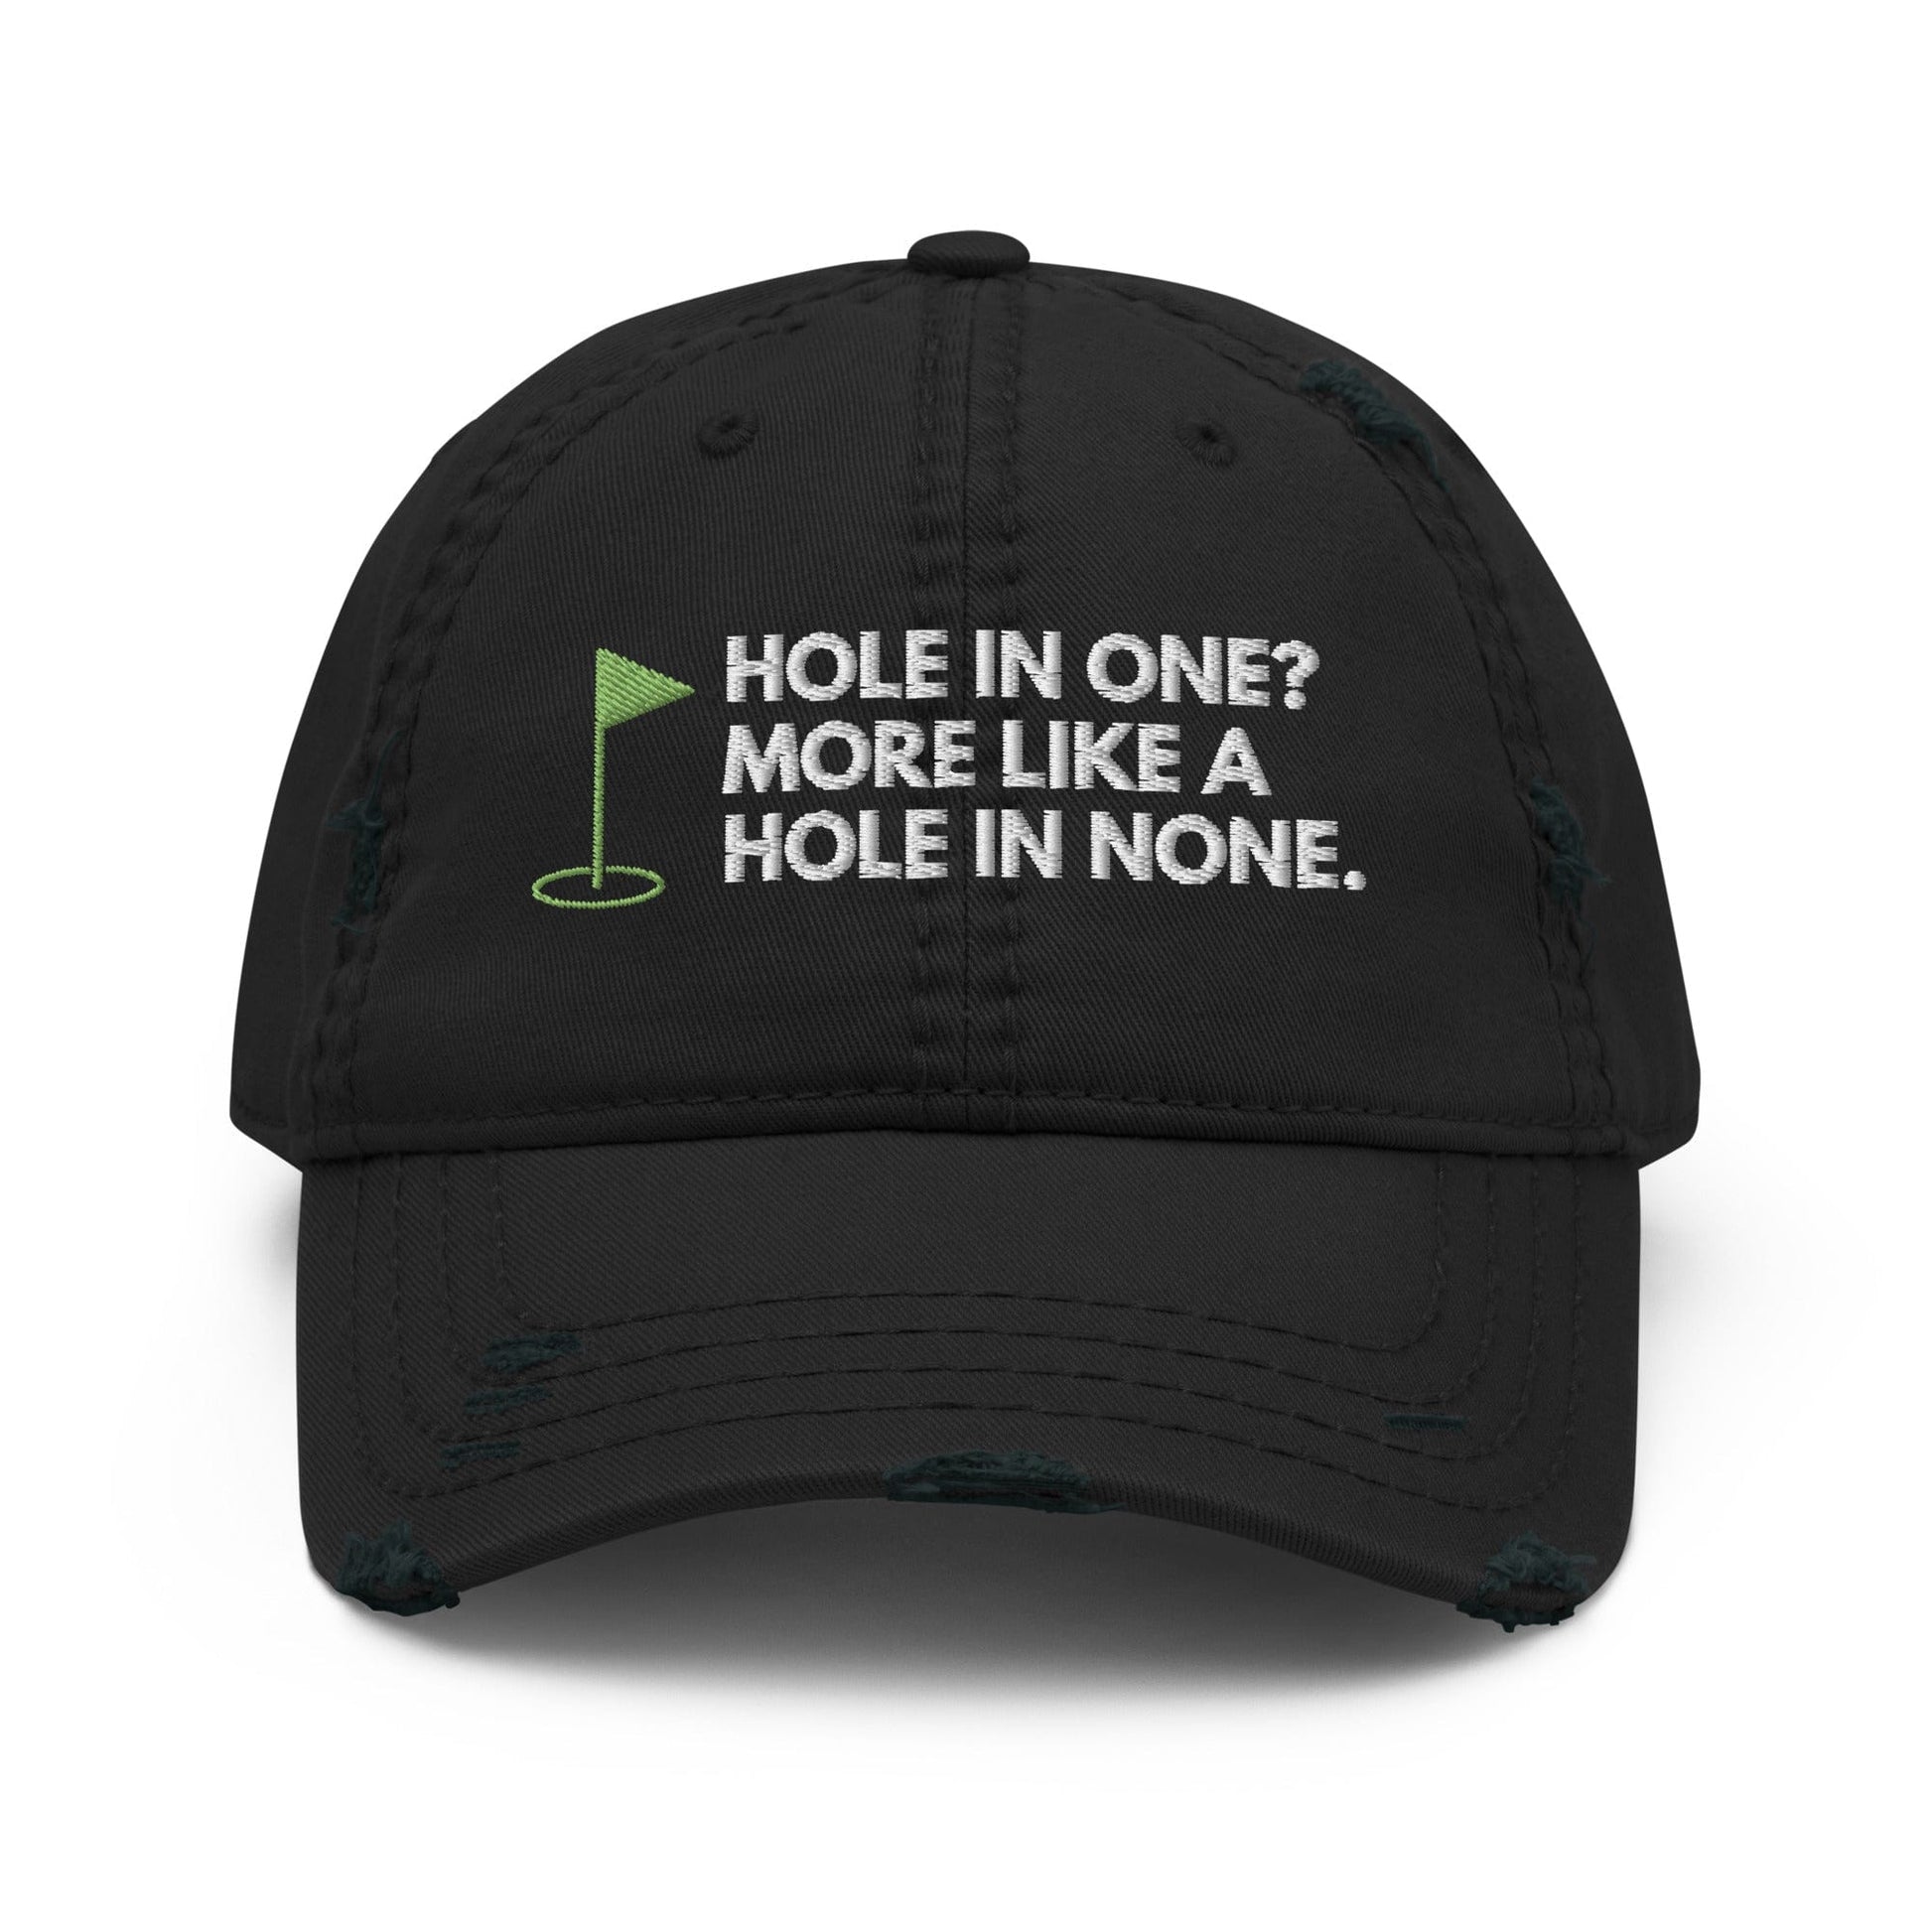 Funny Golfer Gifts  Distressed Cap Black Hole In One More Like Hole In None Hat Distressed Hat